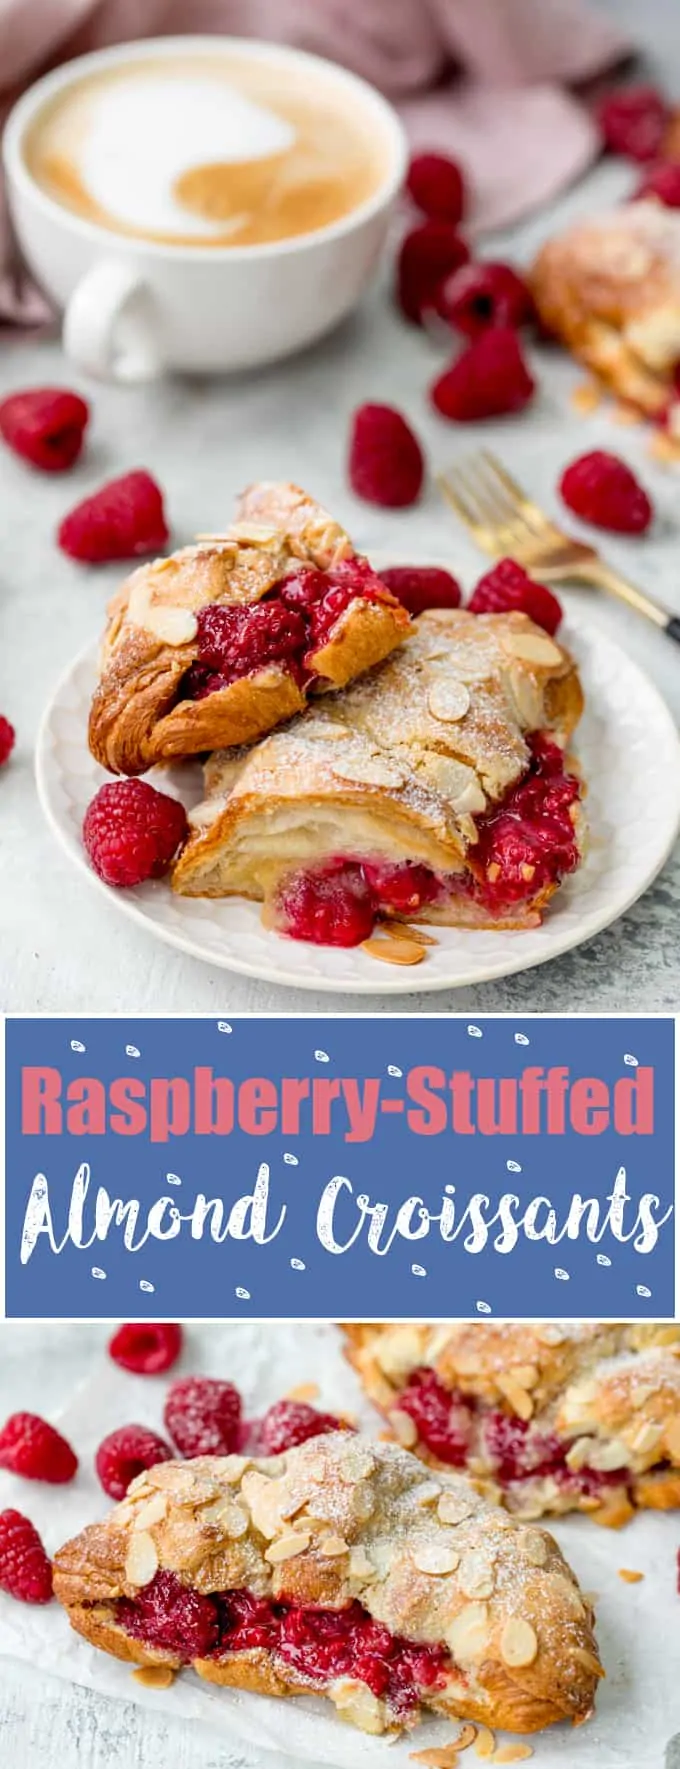 Looking for a breakfast treat? These Raspberry and Almond Croissants, filled and topped with frangipane are the best! A great Christmas breakfast! #almondcroissants #christmasbreakfast #mothersdaybreakfast #raspberrycroissant